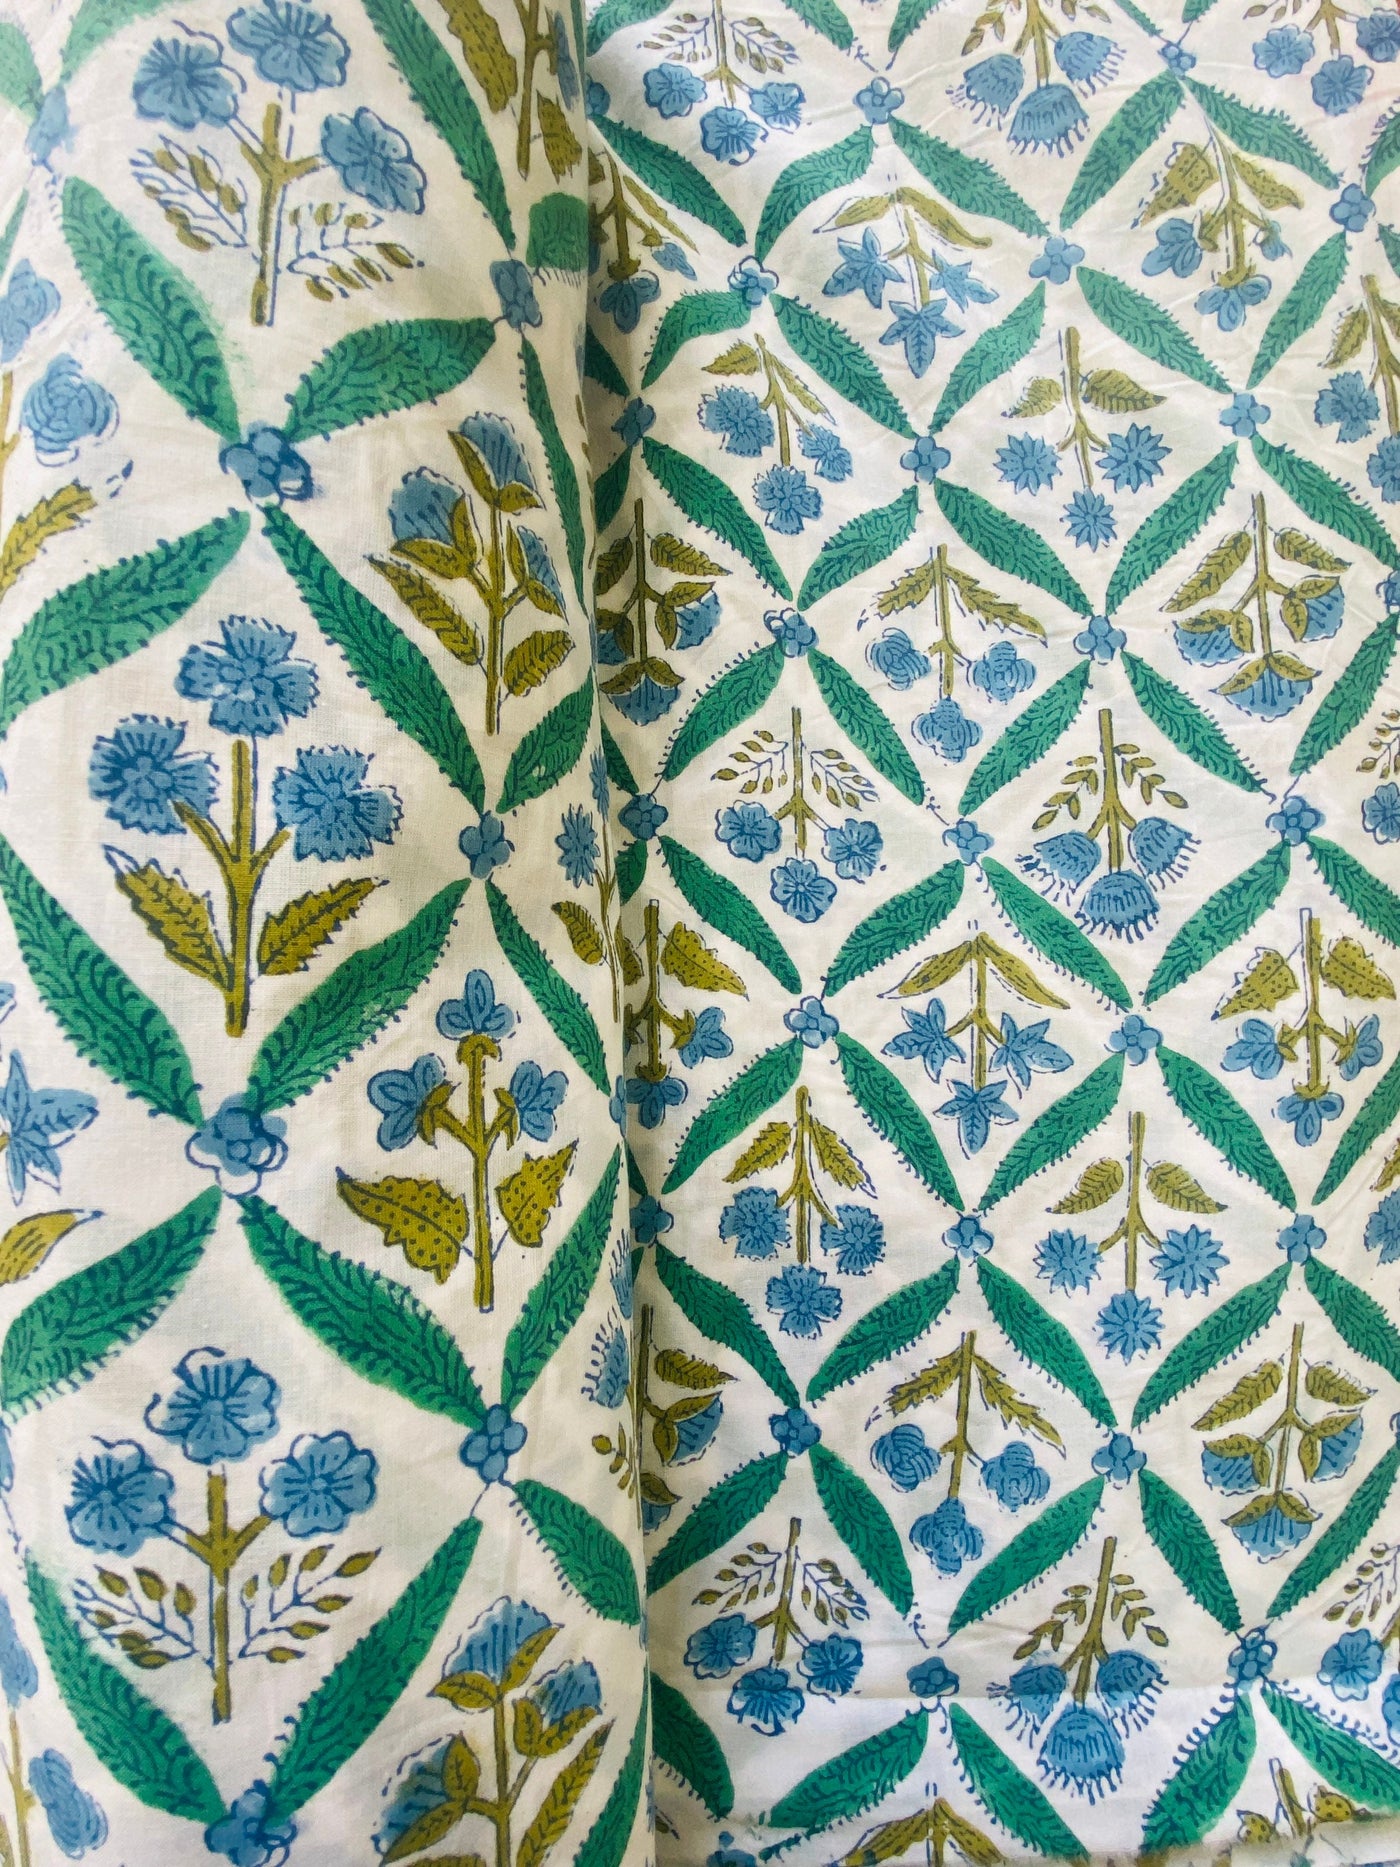 Blue and Green Indian Floral Hand Block Printed 100% Cotton Cloth, Fabric by the Yard, Women's Clothing Curtains Pillows Cushions Lampshades